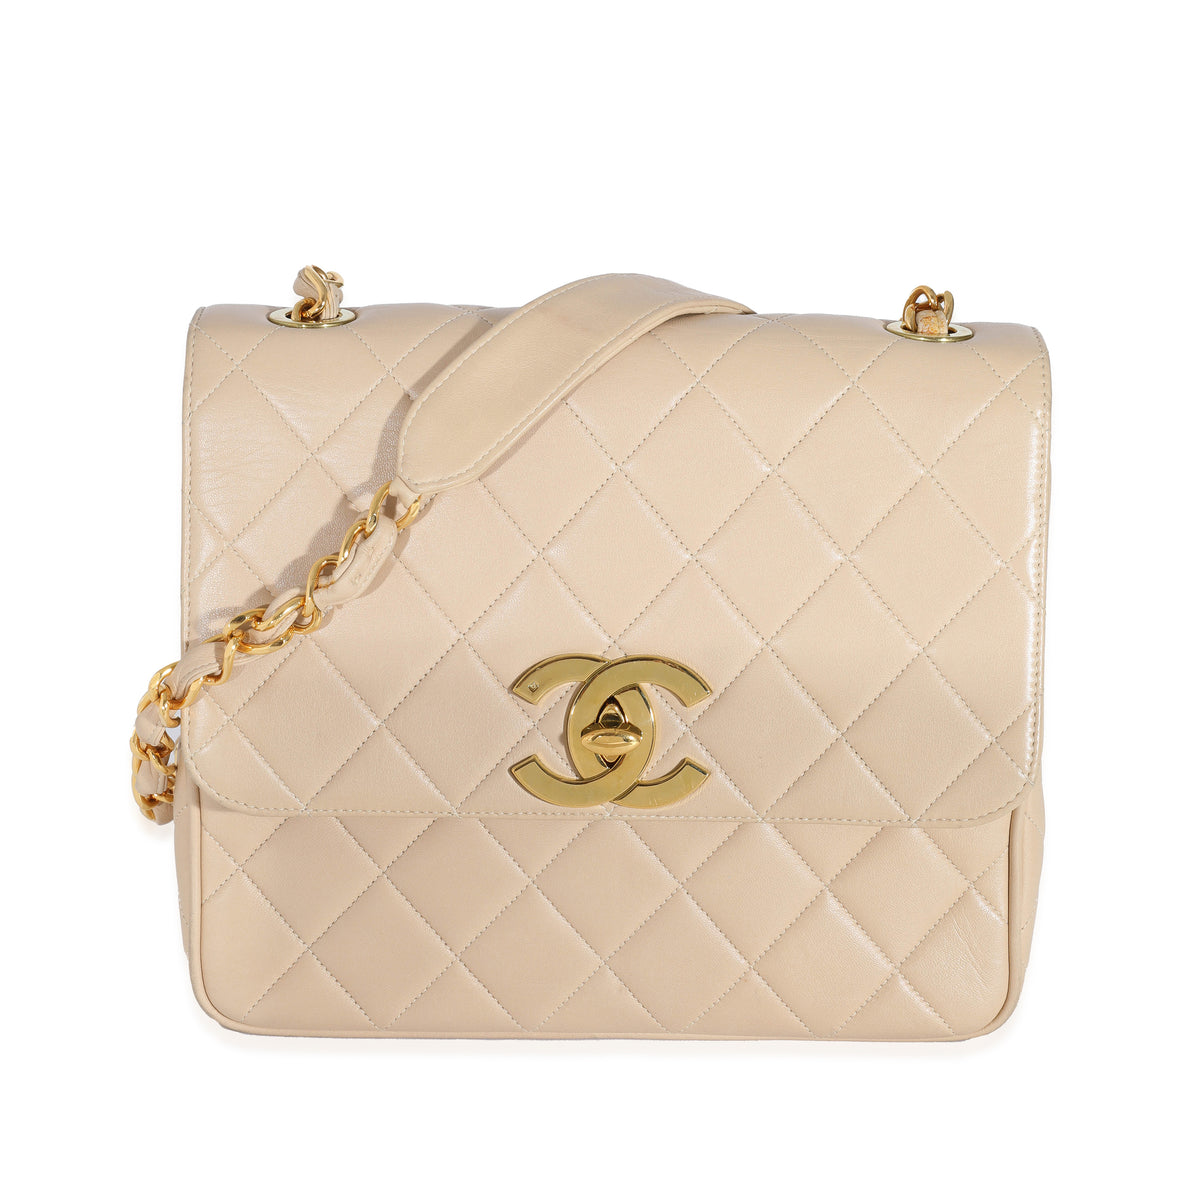 A Quick and Easy Guide to Shopping Pre-Loved Chanel in UAE